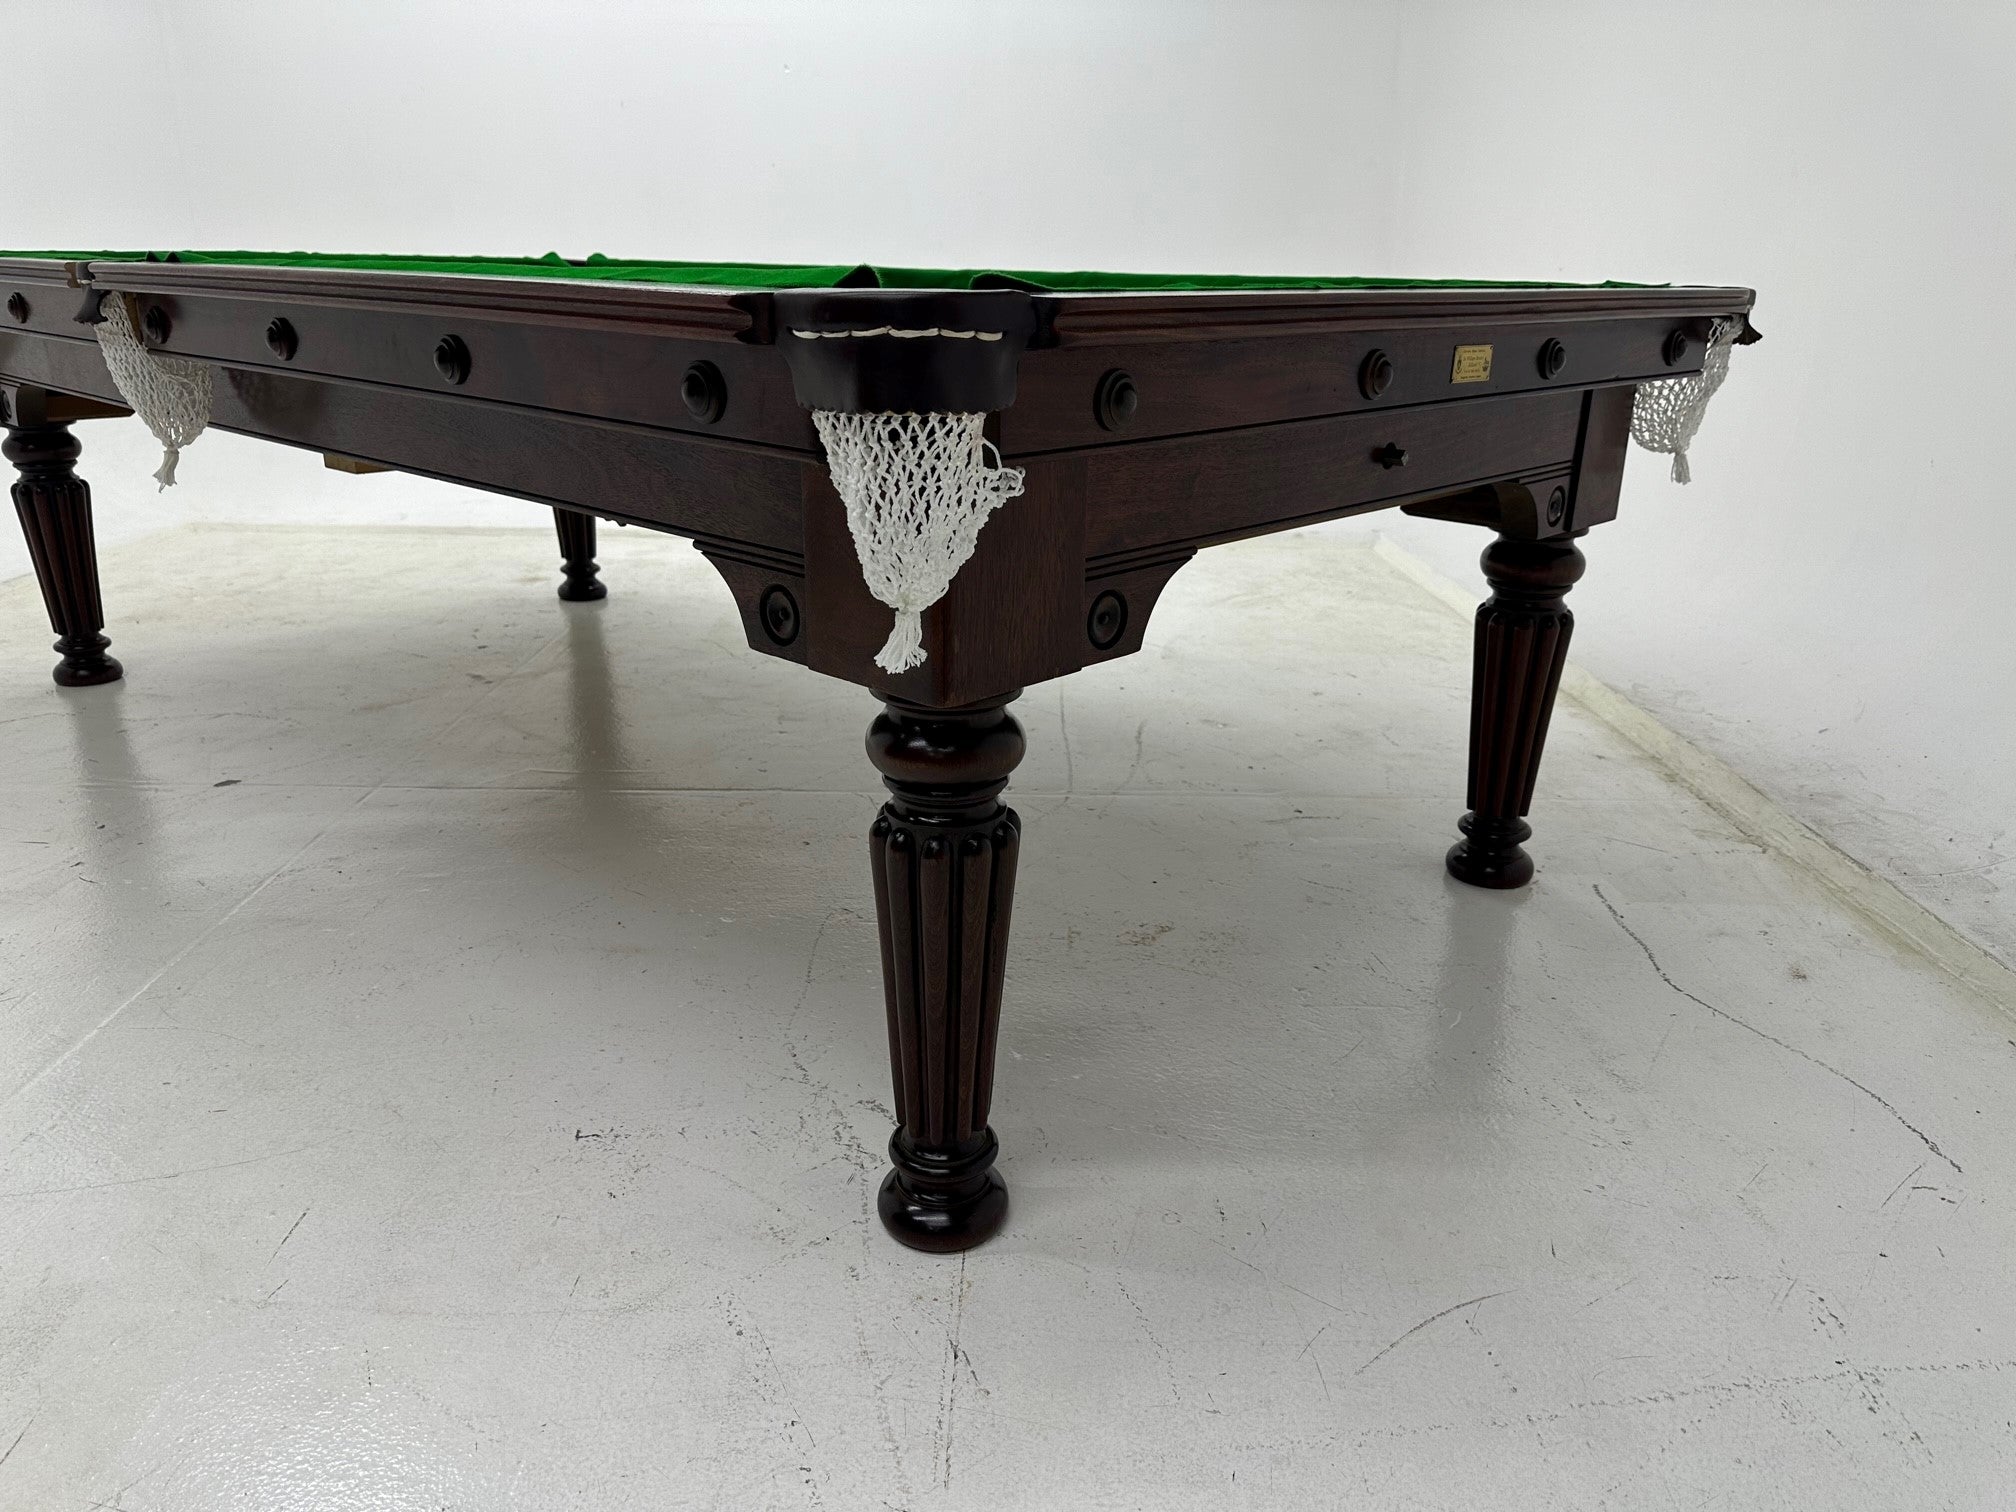 Sir Willliam Bently 9' Snooker & Dining Table